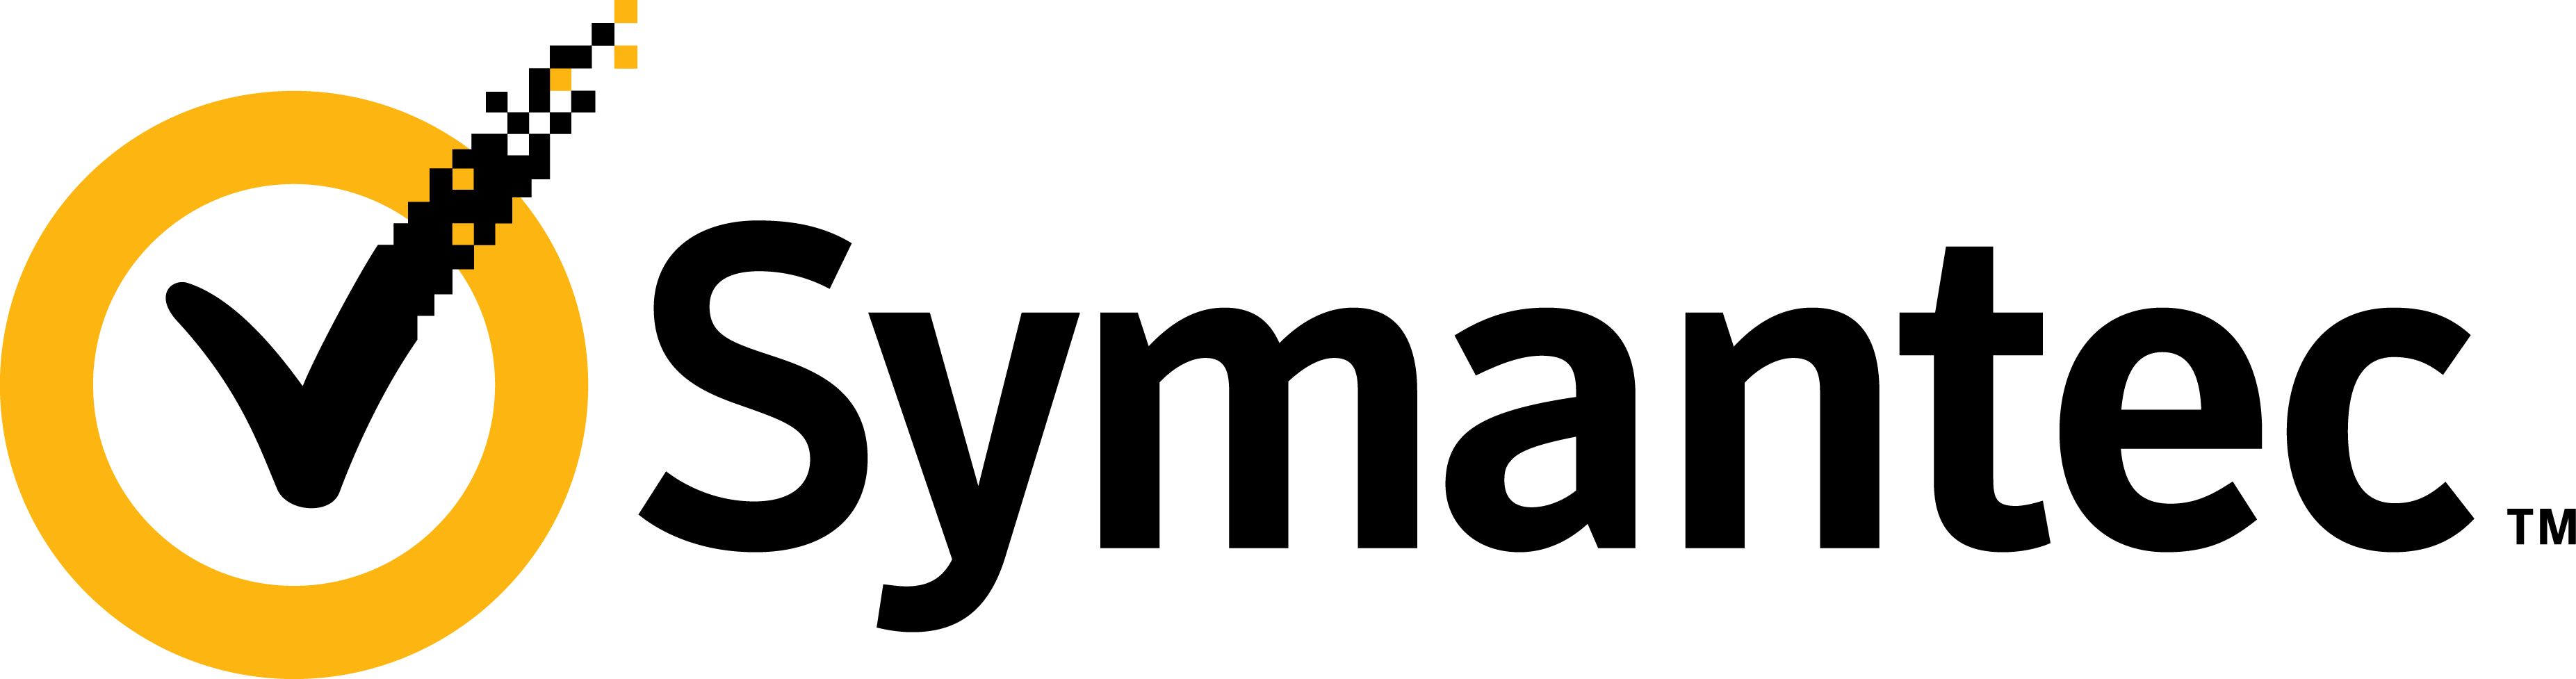 Symantec Keeping SMBs Secure